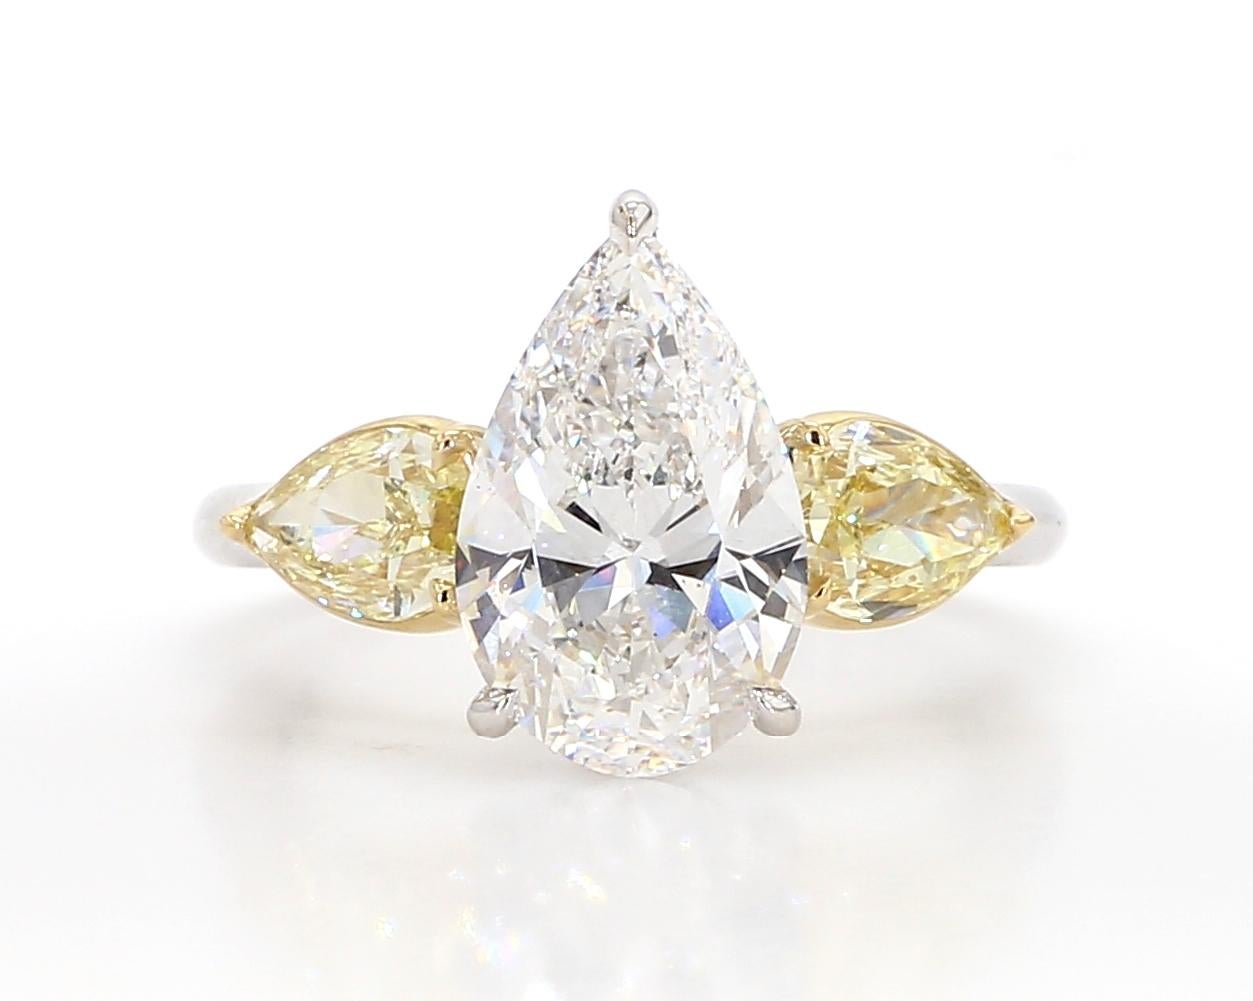 Novel Collection showcasing a unique and elegant engagement ring, At its heart lies a stunning 3.12 carat pear-shaped diamond, GIA certified as E color and VS1 in clarity. This captivating centerpiece is complemented by two Fancy Yellow diamonds